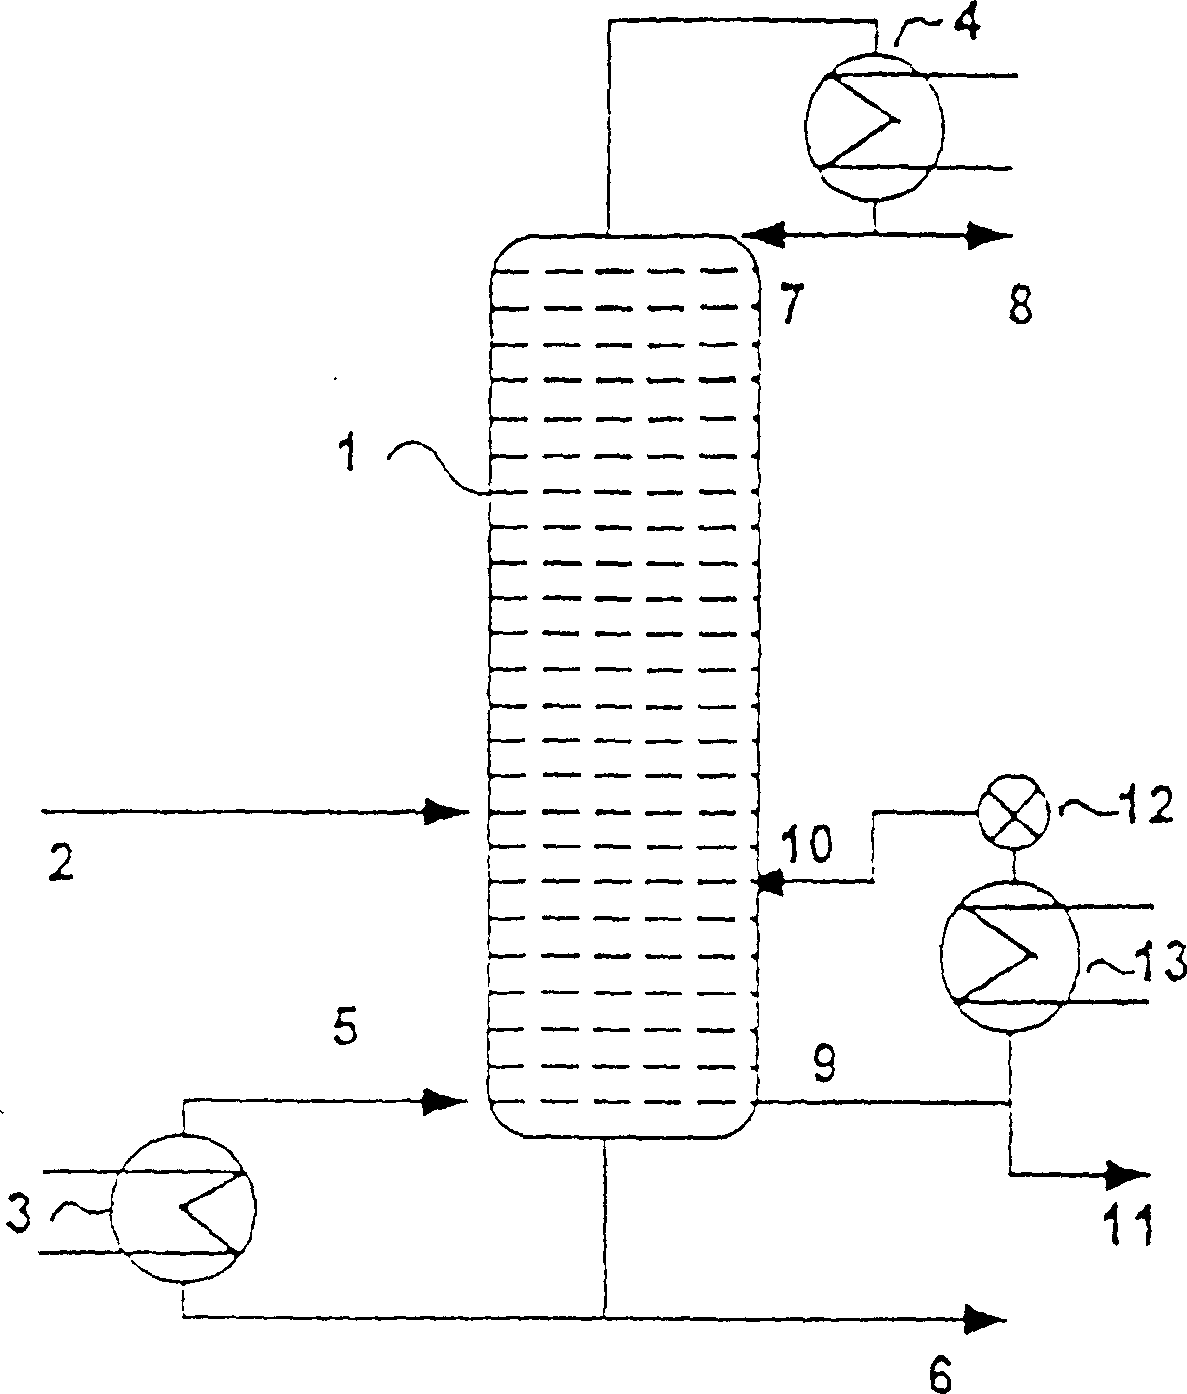 Method for preparing highly pure aqueous hydroxylamine solutions